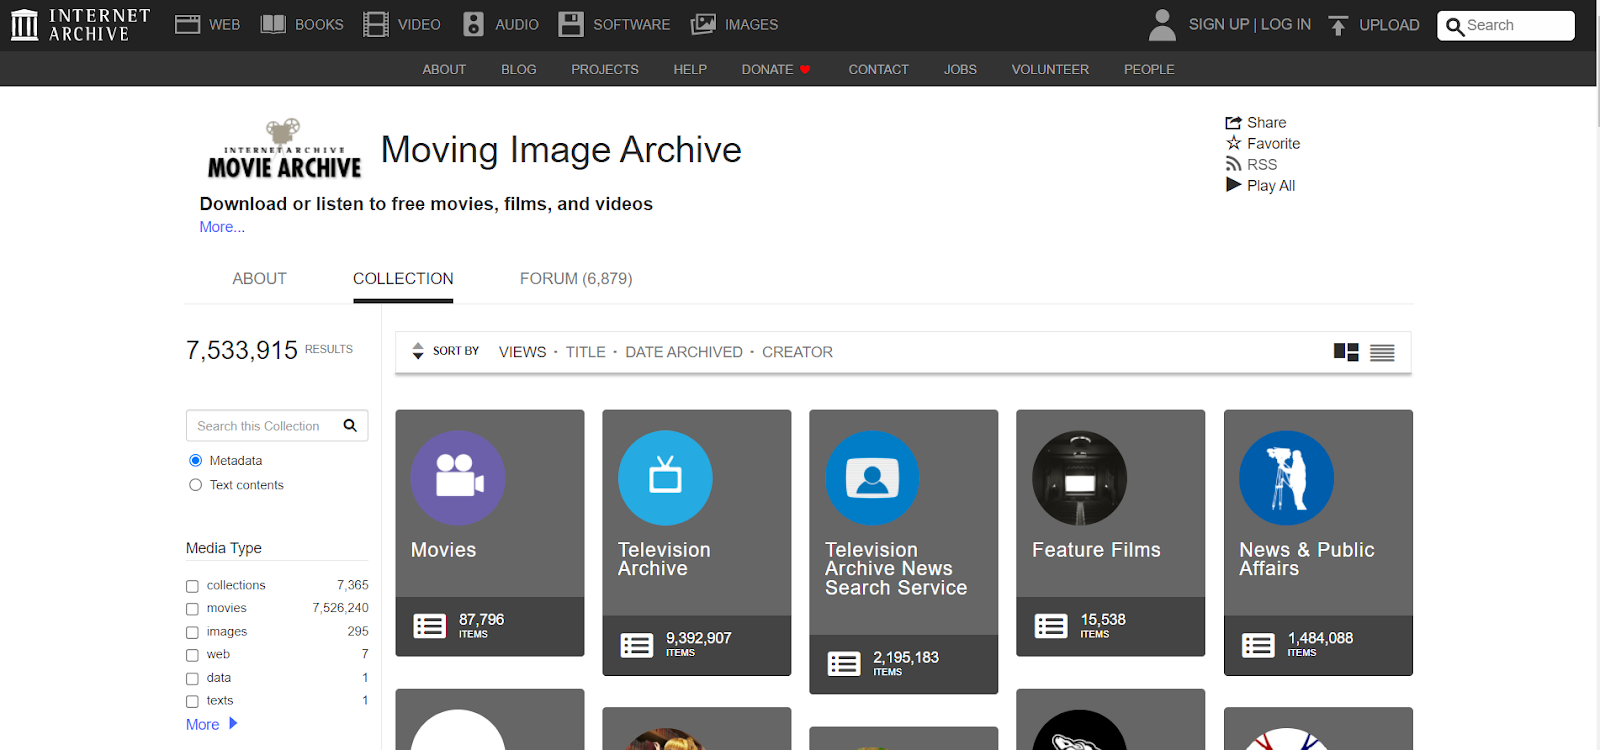 Internet Archive - Moving Image Archive page